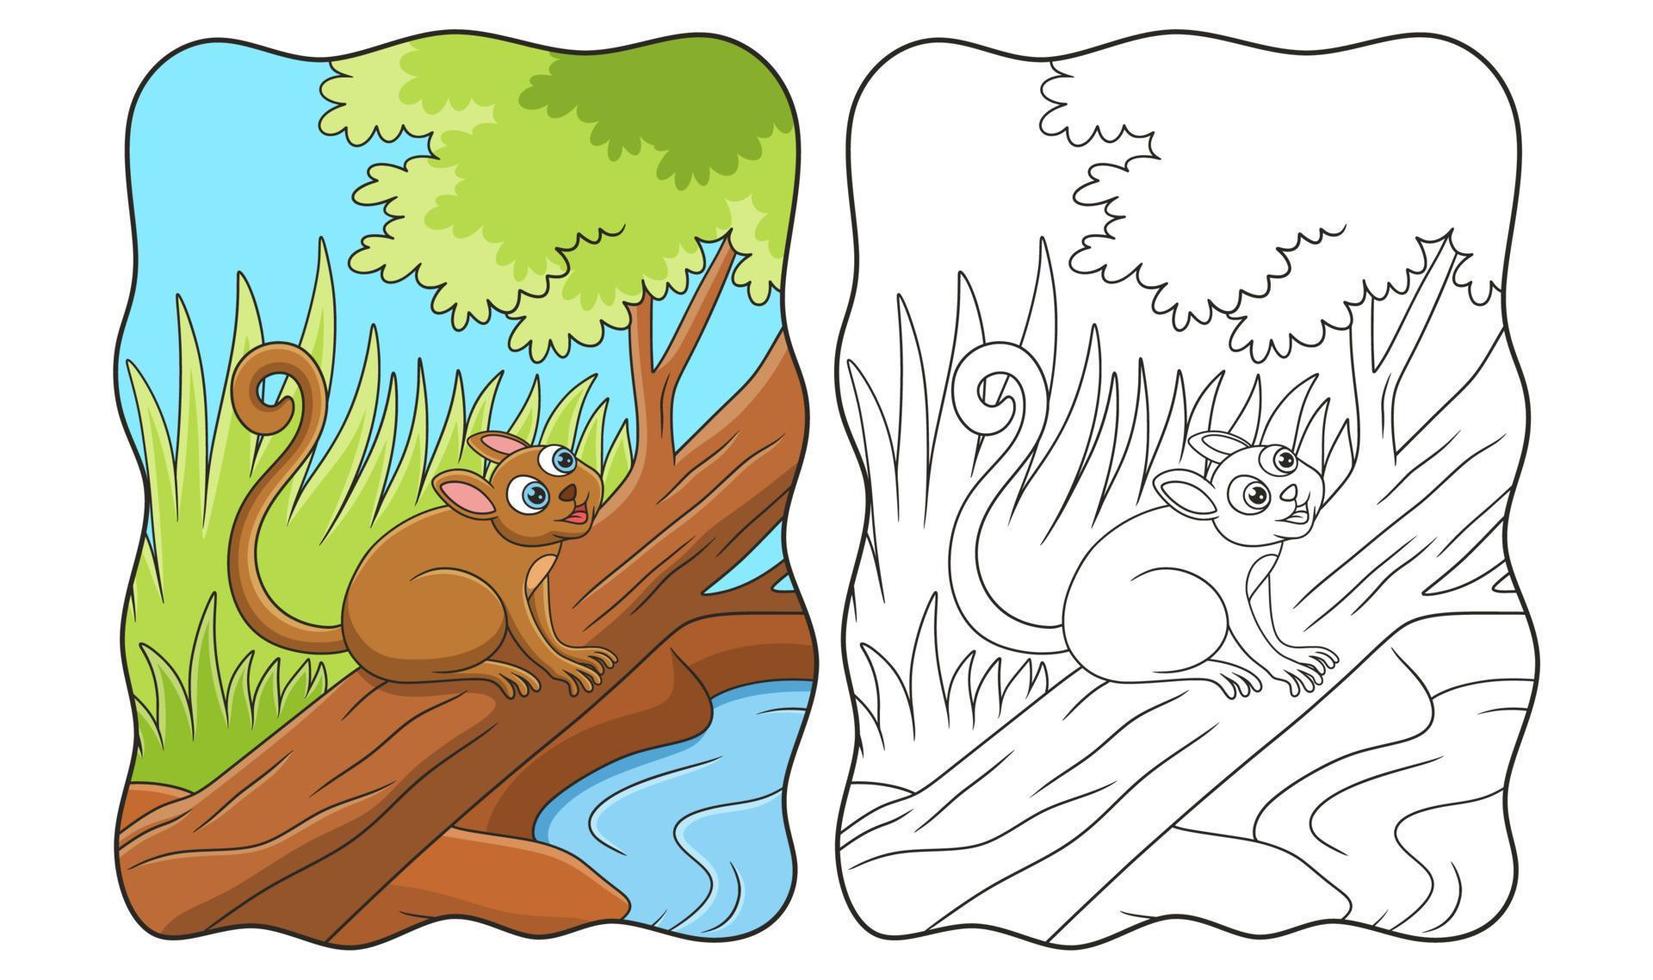 cartoon illustration tarsiers relaxing on a fallen tree trunk by the river to enjoy the beauty of the forest book or page for kids vector